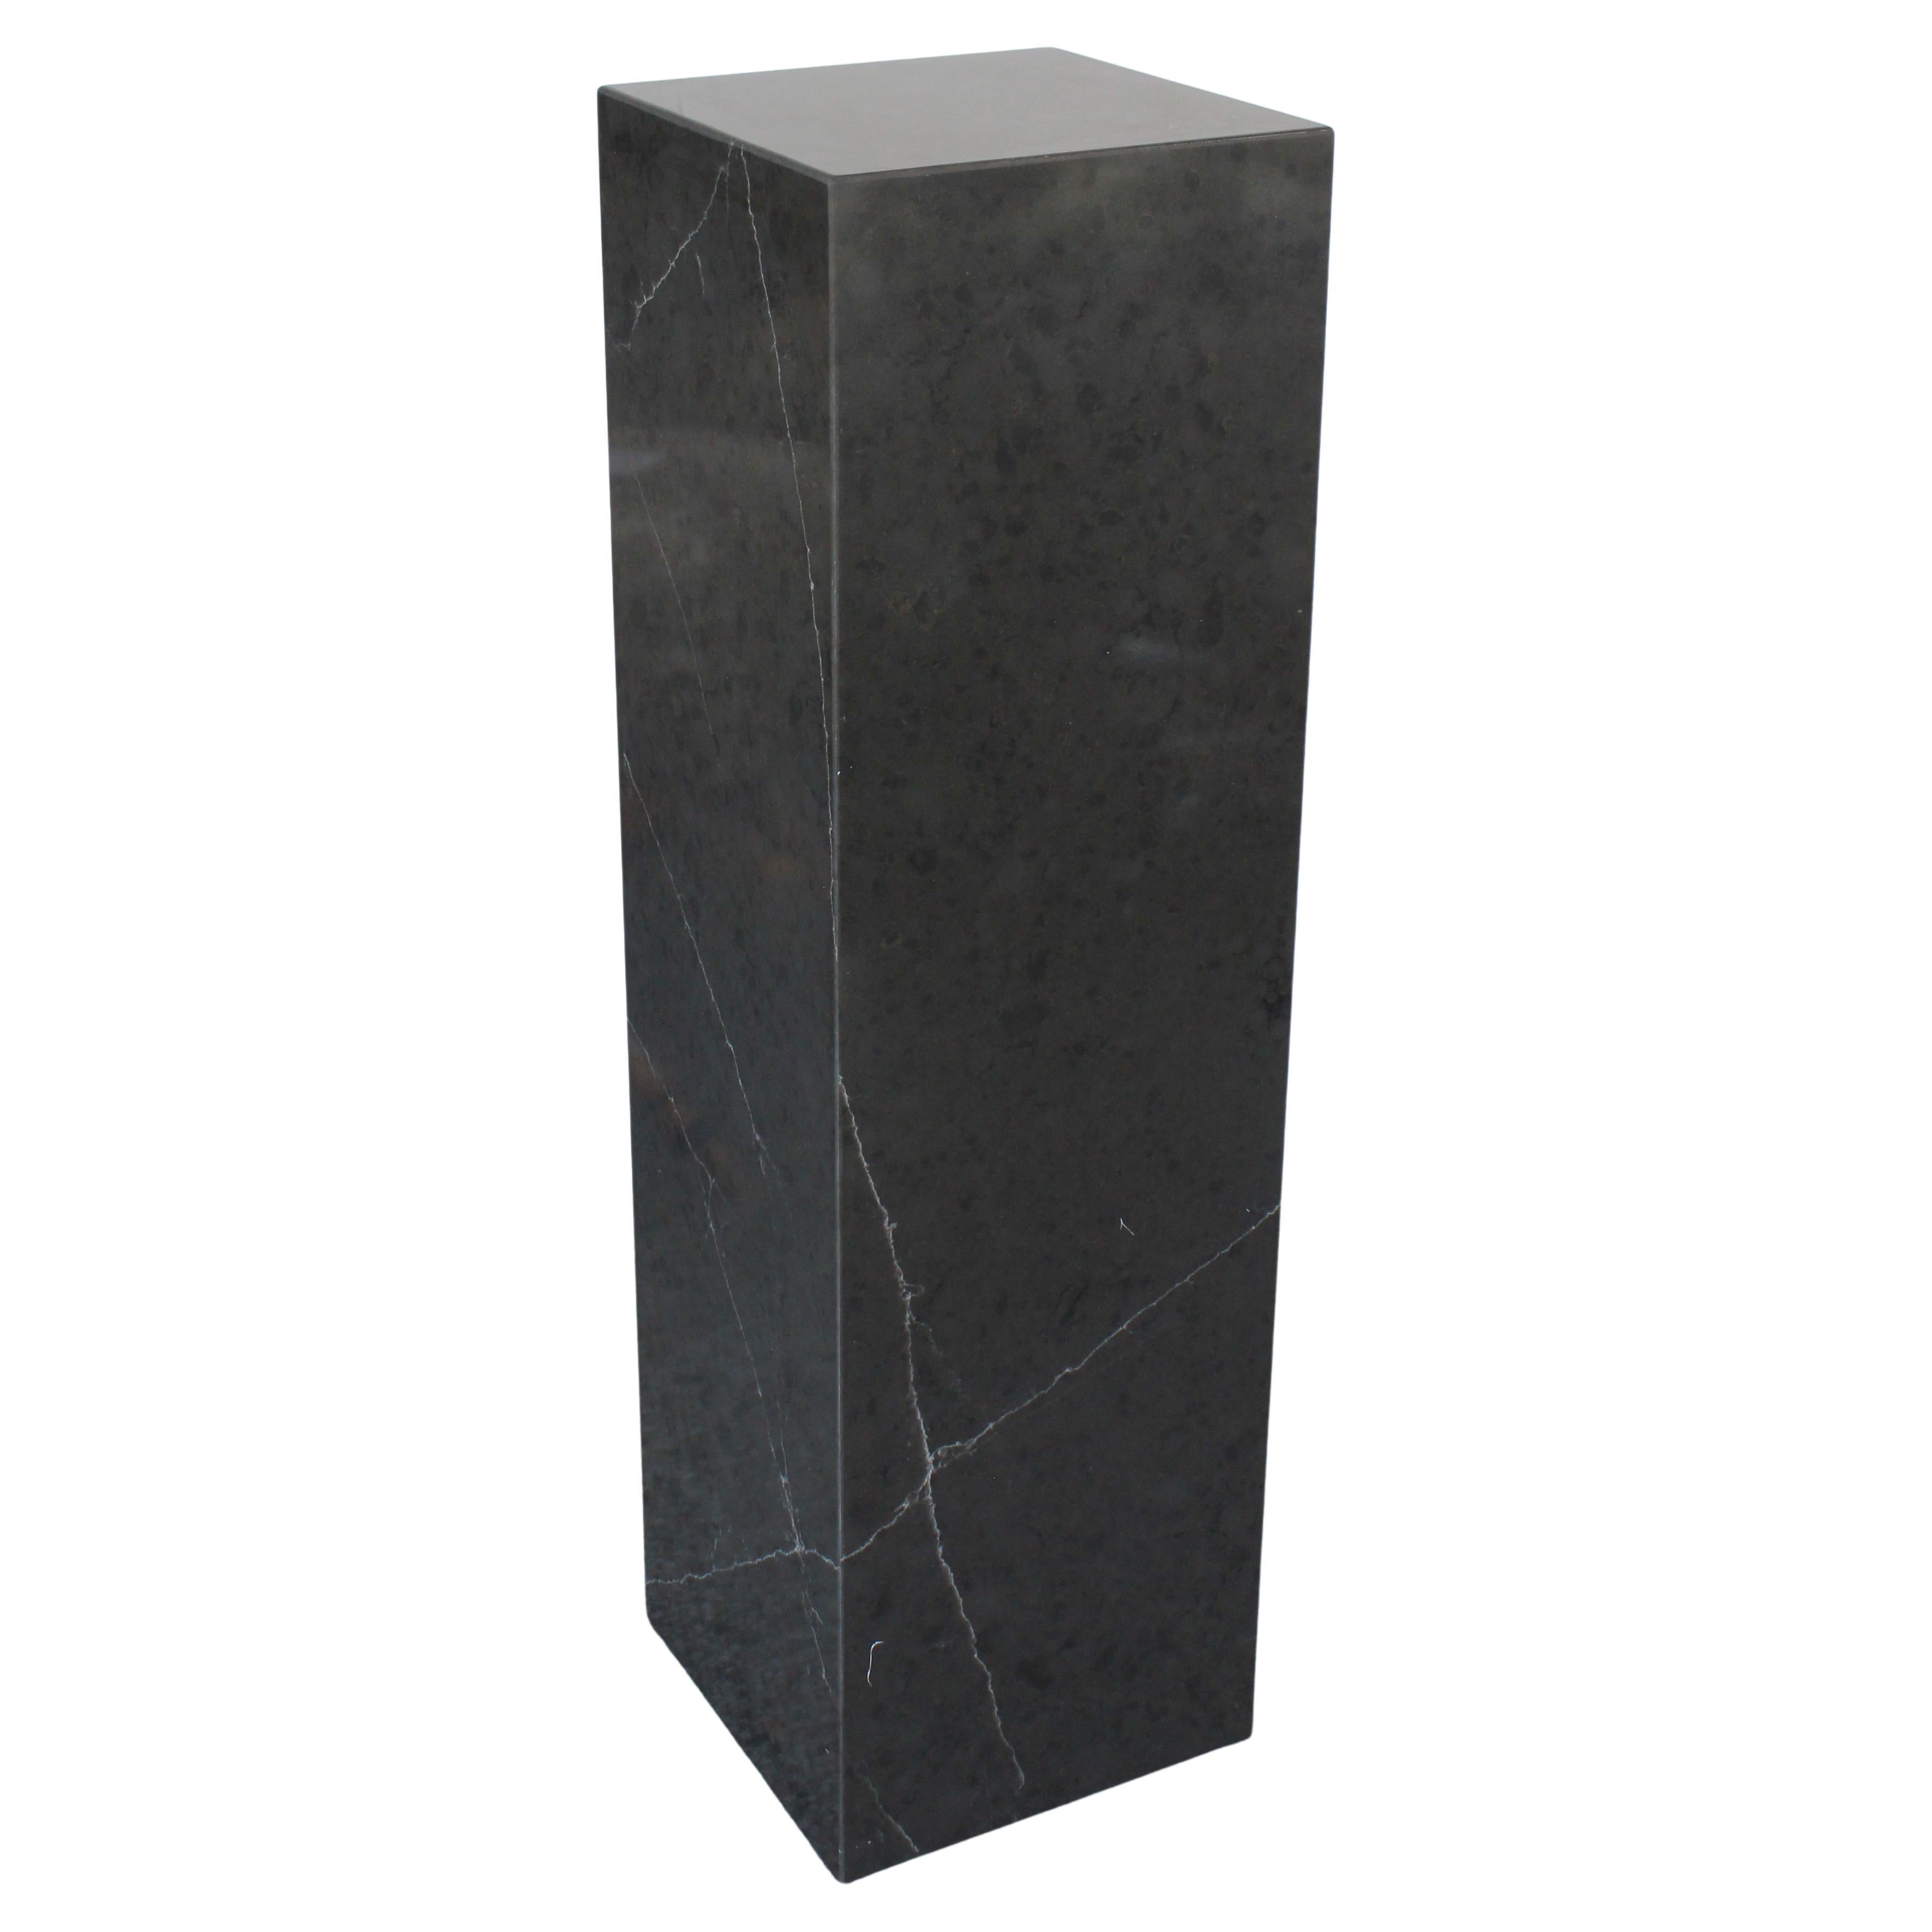 This stylish and chic varigated marlbe pedestal is a custom one-of-a-kind piece created by the Iconic Snob Galeries.

Note: The color is a mottled gray and when the light hits it can turn a dark gray/black.

Note: There are aluminum risers on